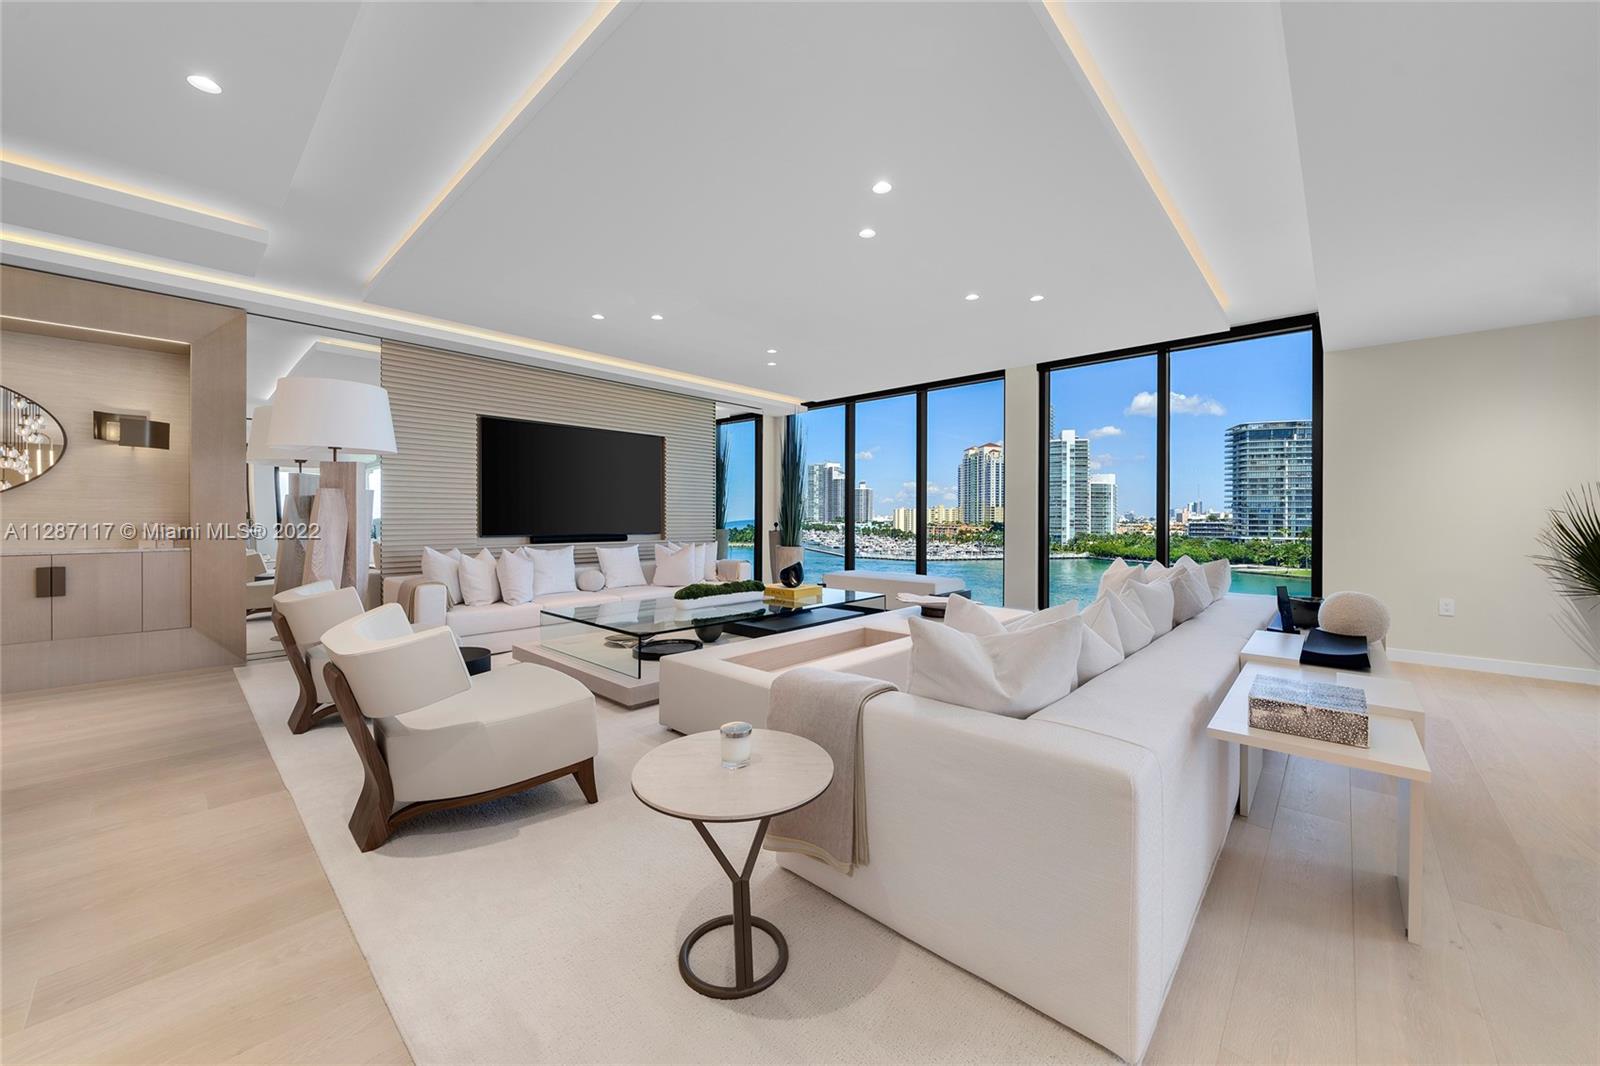 This stunning custom designed Northeast corner unit at Palazzo Della Luna is being offered furnished. This perfectly proportioned unit offers 4,904 SF w/wide plank oak wood floors, custom millwork, lighting & wall treatments throughout, plus a large wraparound terrace with direct Biscayne Bay, Government Cut, Miami Beach & Ocean views. Spacious flow through living & dining room, & separate media area. Boffi designed chef’s kitchen & top-of-the-line Miele & Sub-Zero appliances. The private principal suite has a sitting area, dual walk-in closets, direct water views, amazing bathroom w/book-matched Carrara marble rain shower & soaking tub. 2nd private back terrace w/views to Fisher Island & 3 other bedrooms w/en-suite bathrooms. Enjoy 6-star Palazzo amenities plus all Fisher amenities.